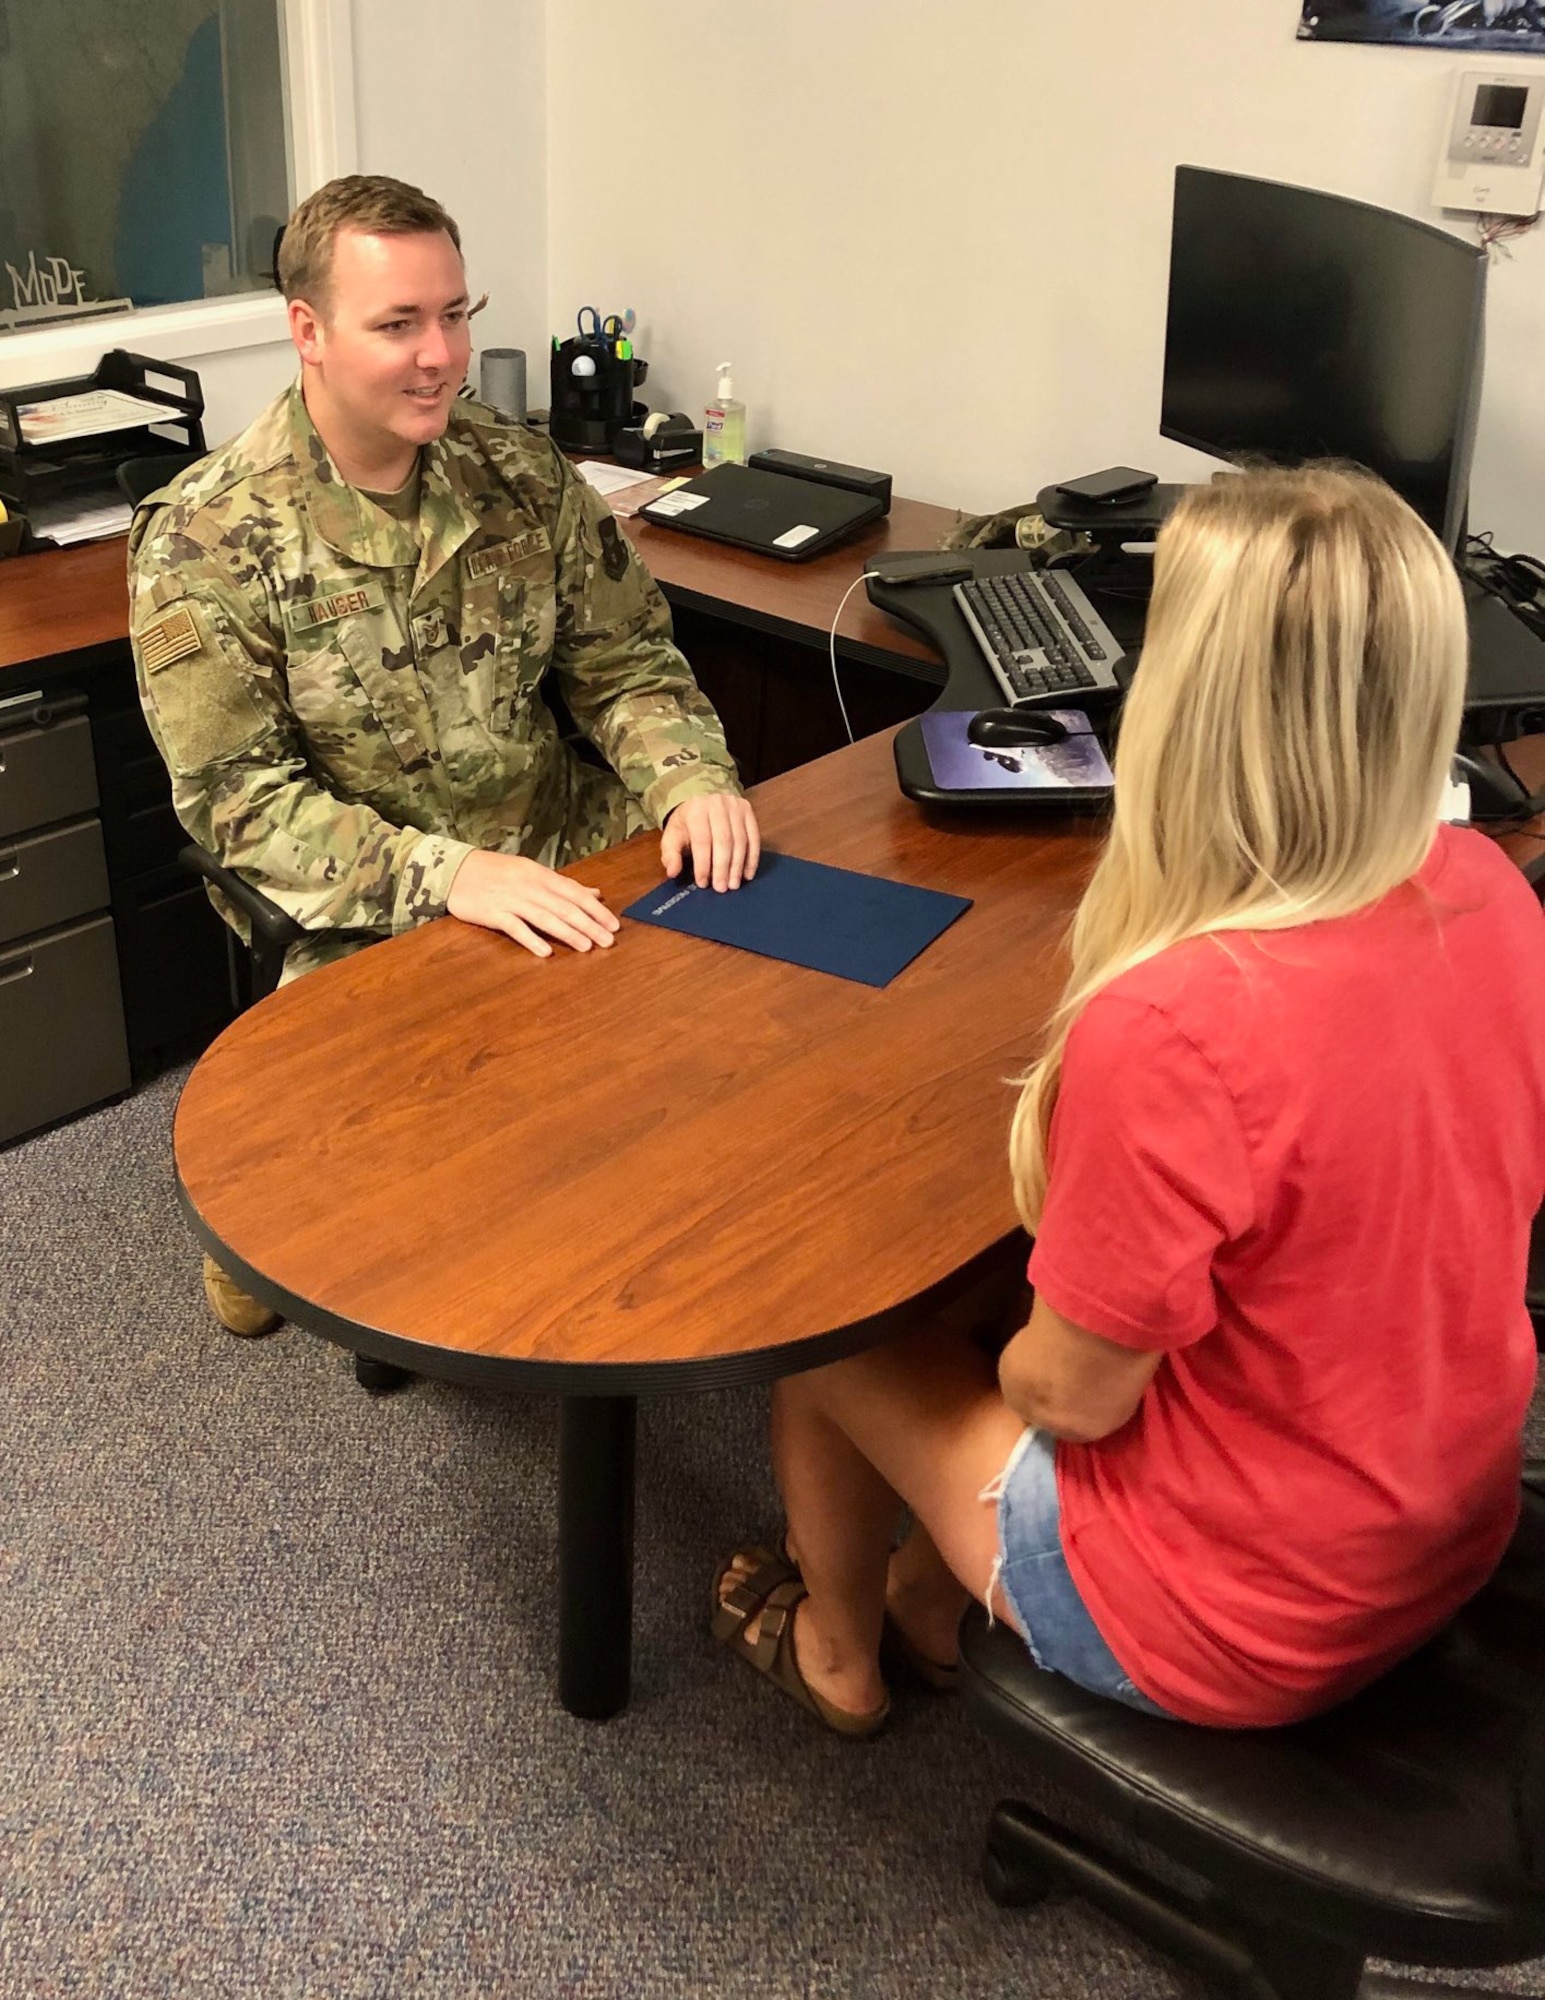 Tech. Sgt. Kyle Hauser, 351st Recruiting Squadron at Joint Base Charleston, South Carolina, met his fiscal 2020 accession goal in less than four months.